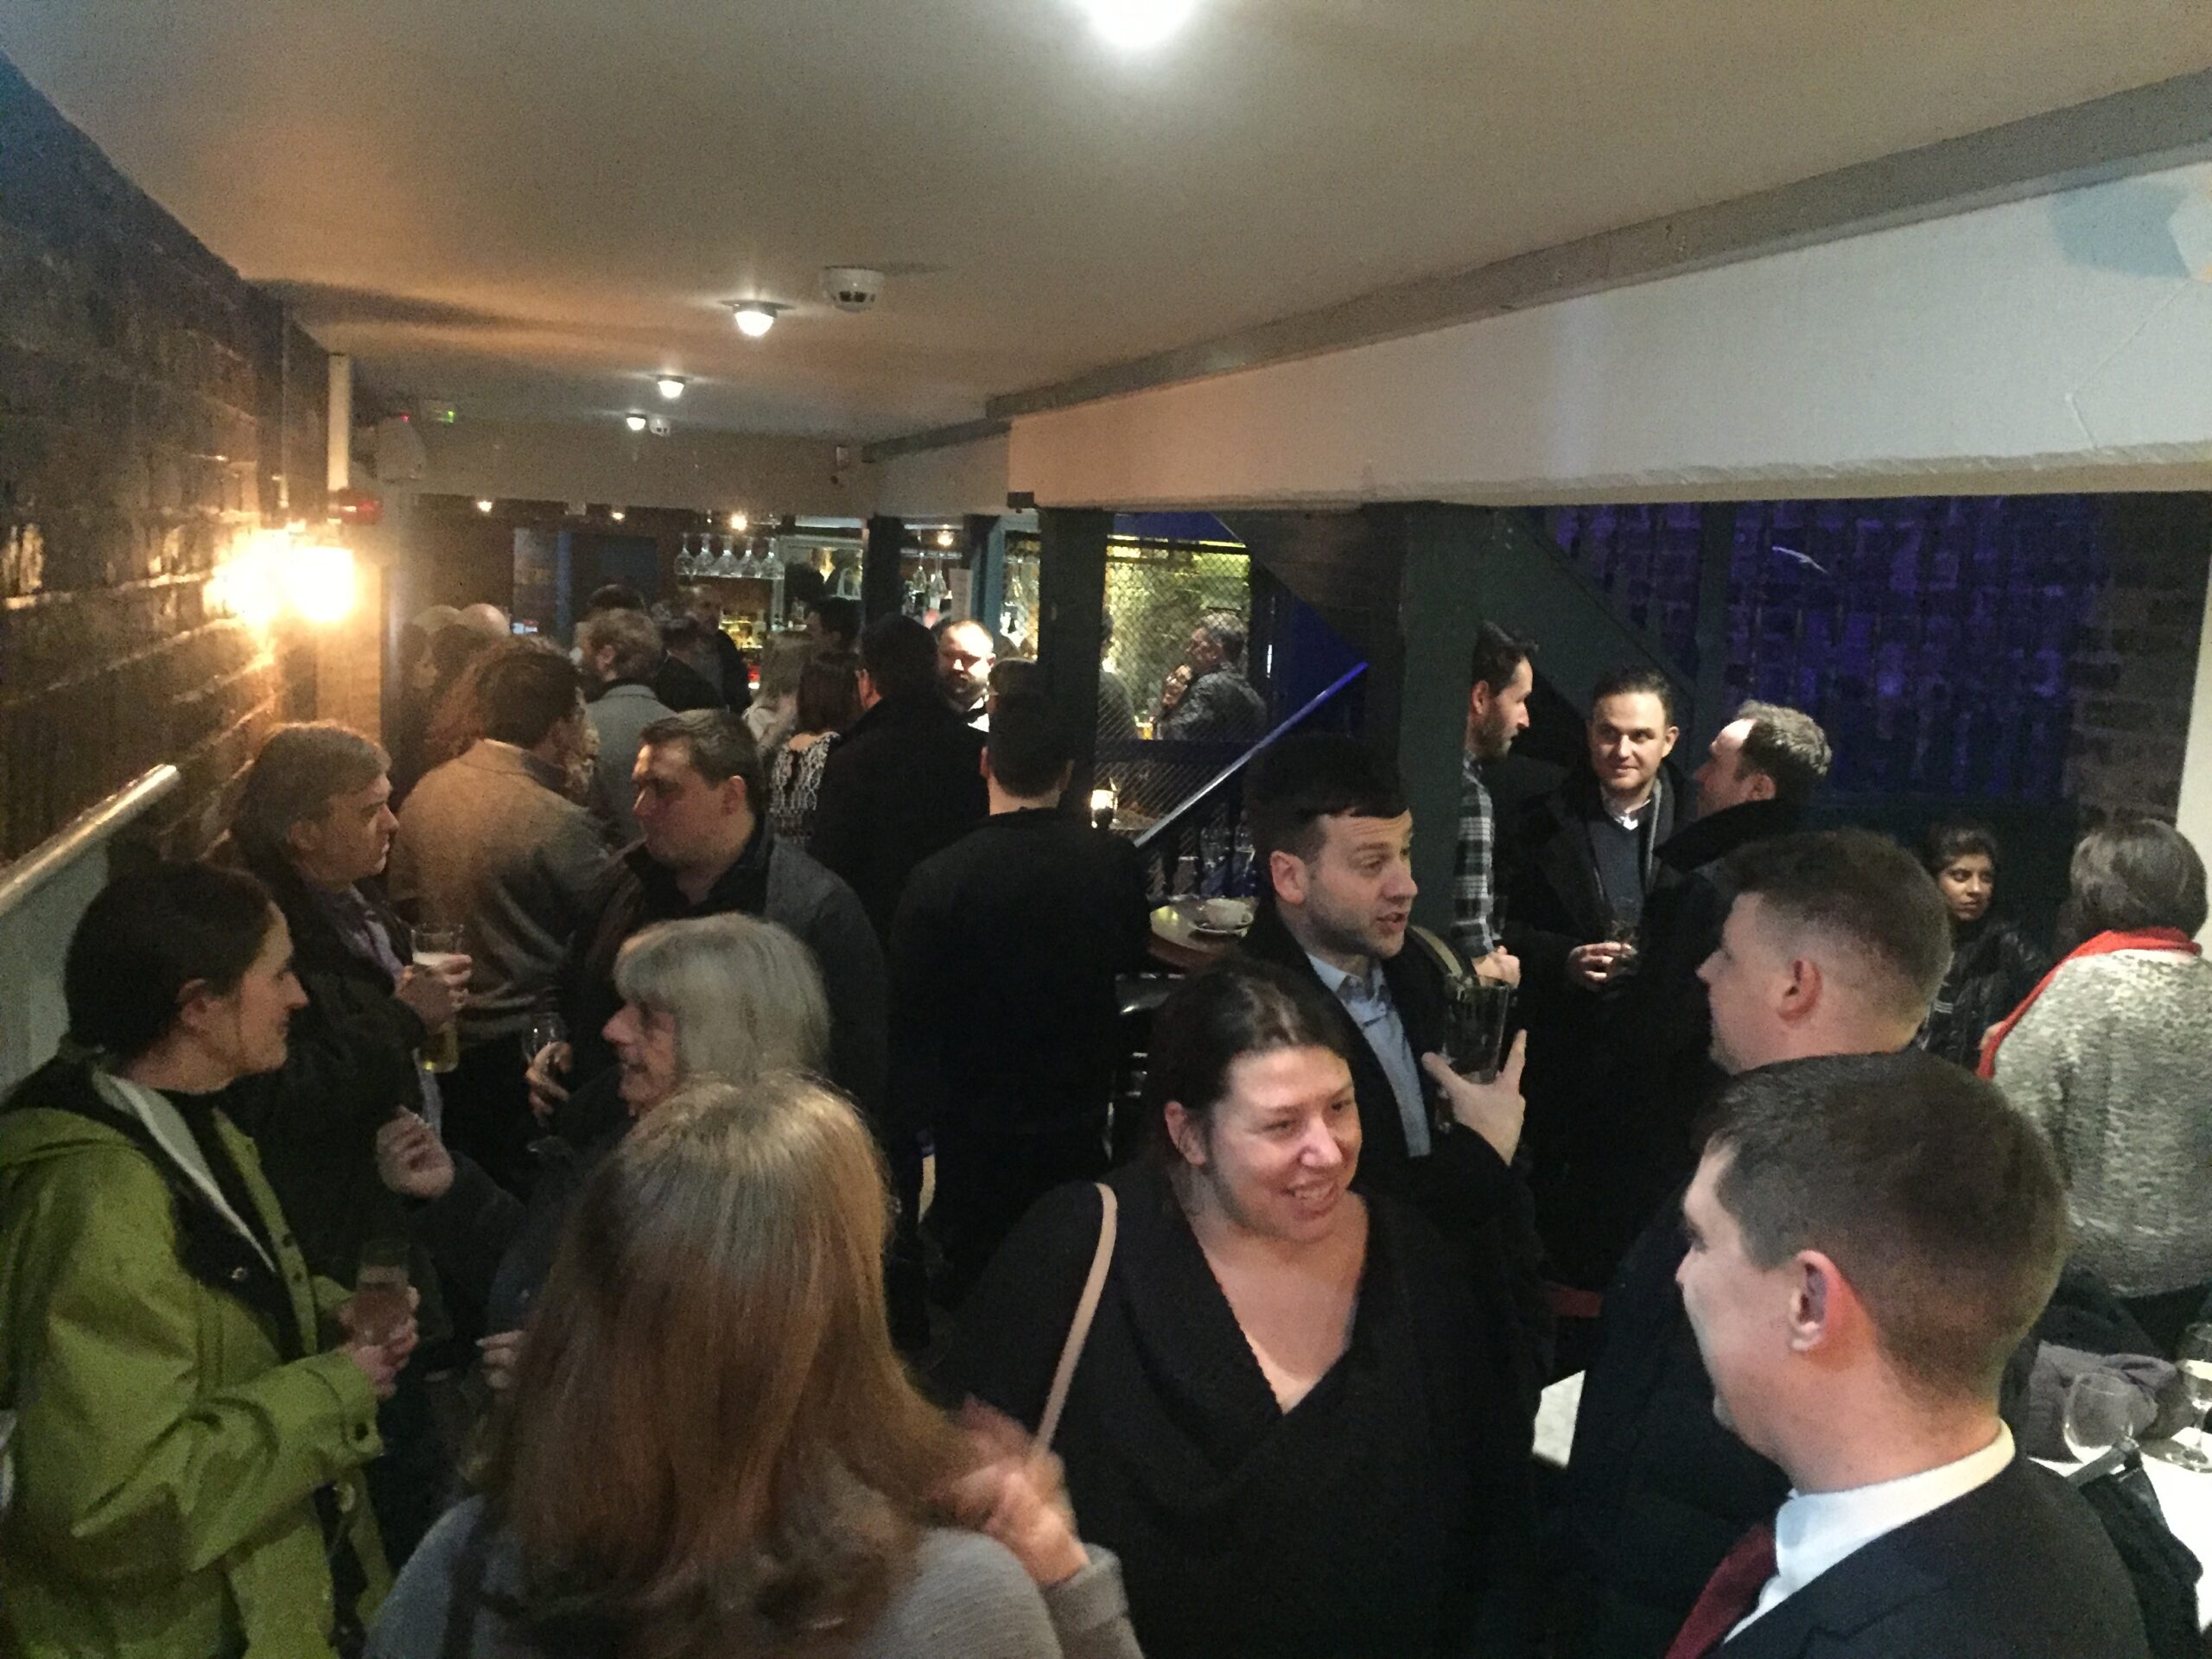 5 Things People Said About The Big Altrincham Social